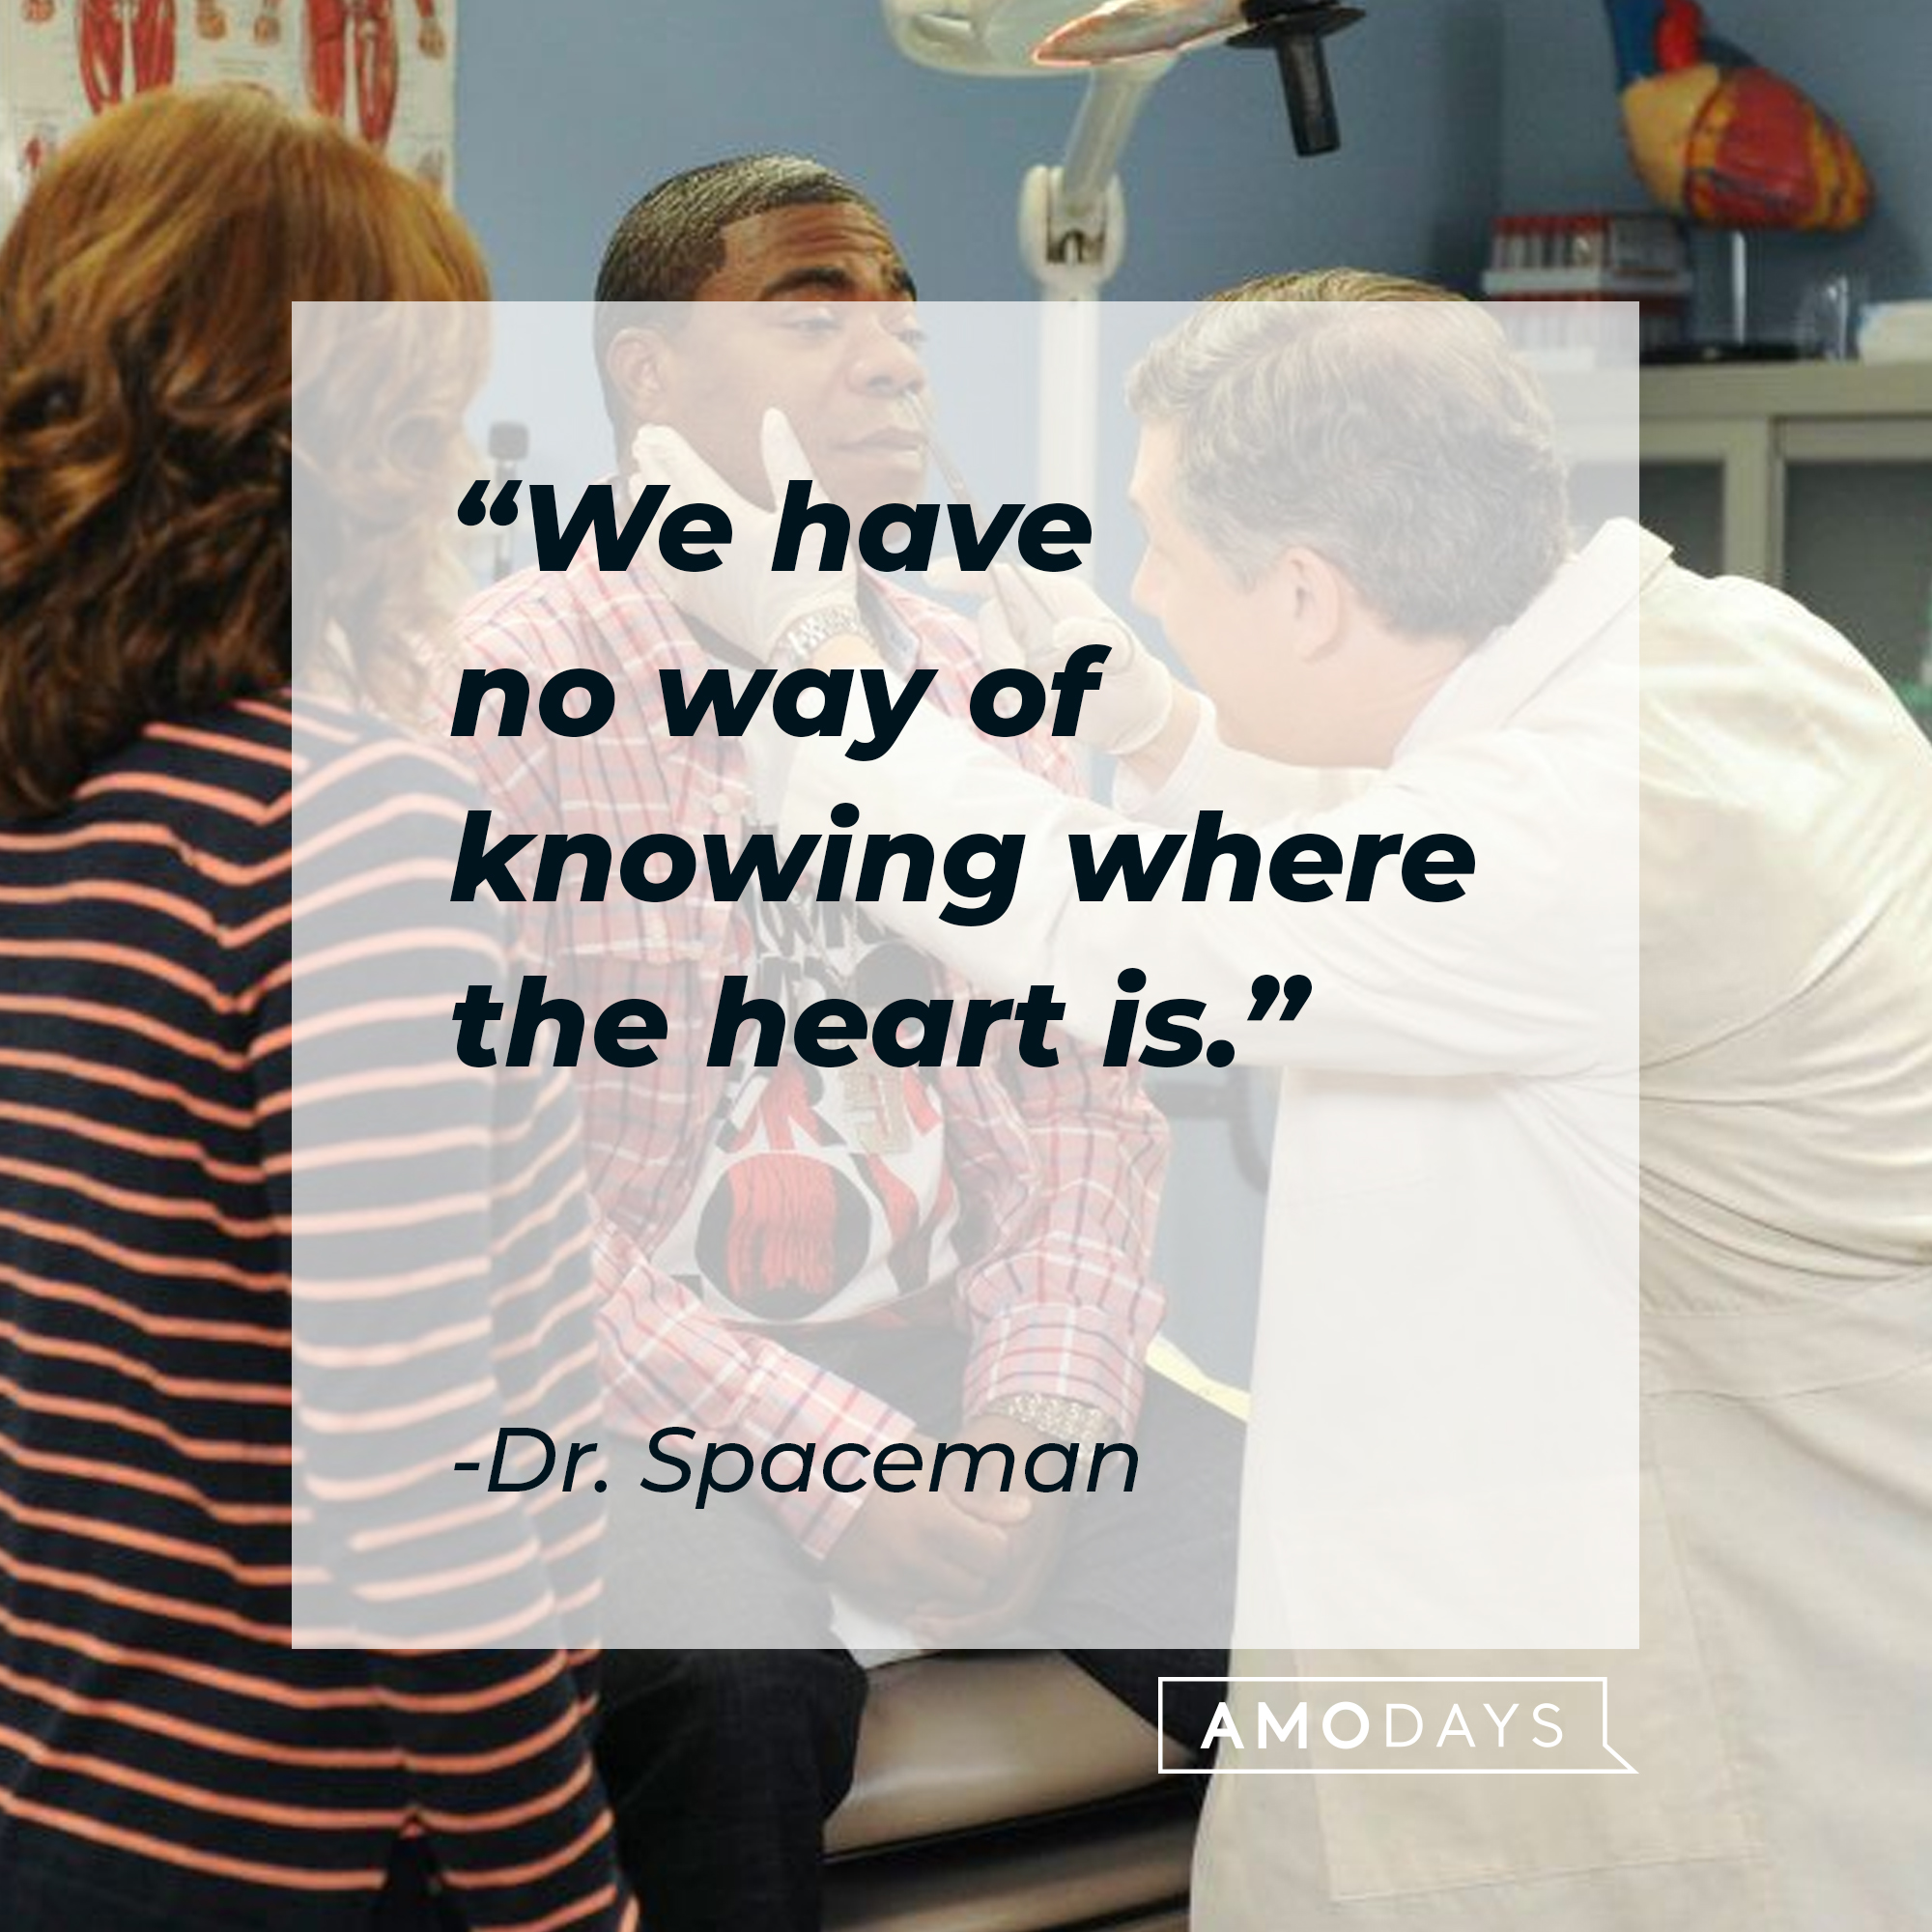 Dr. Spaceman's quote: "We have no way of knowing where the heart is." | Source: facebook.com/30RockTV